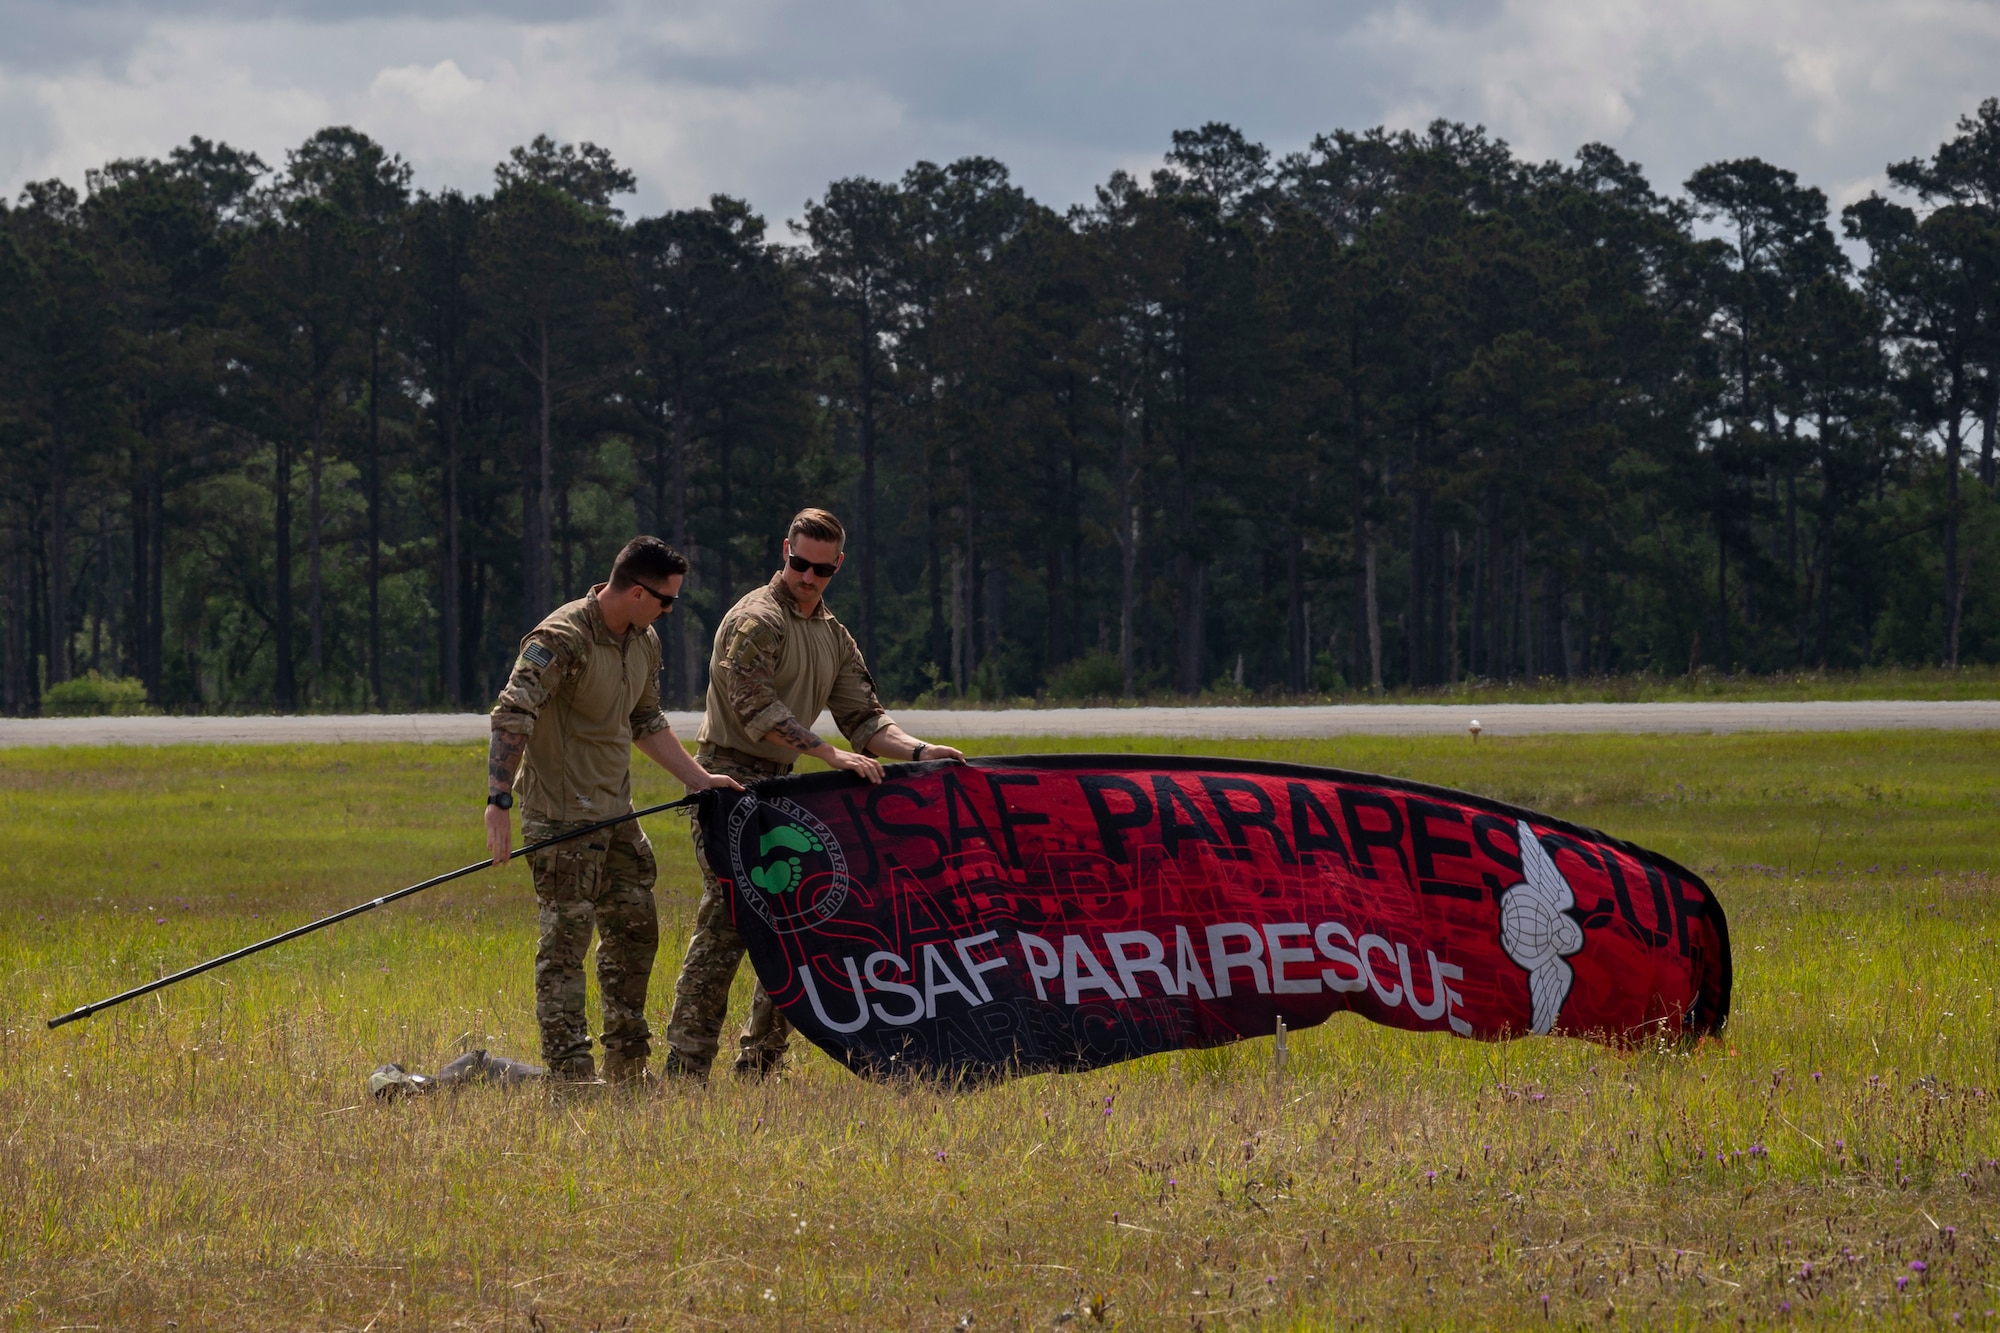 Photo of Airmen preparing to place a flag in the ground